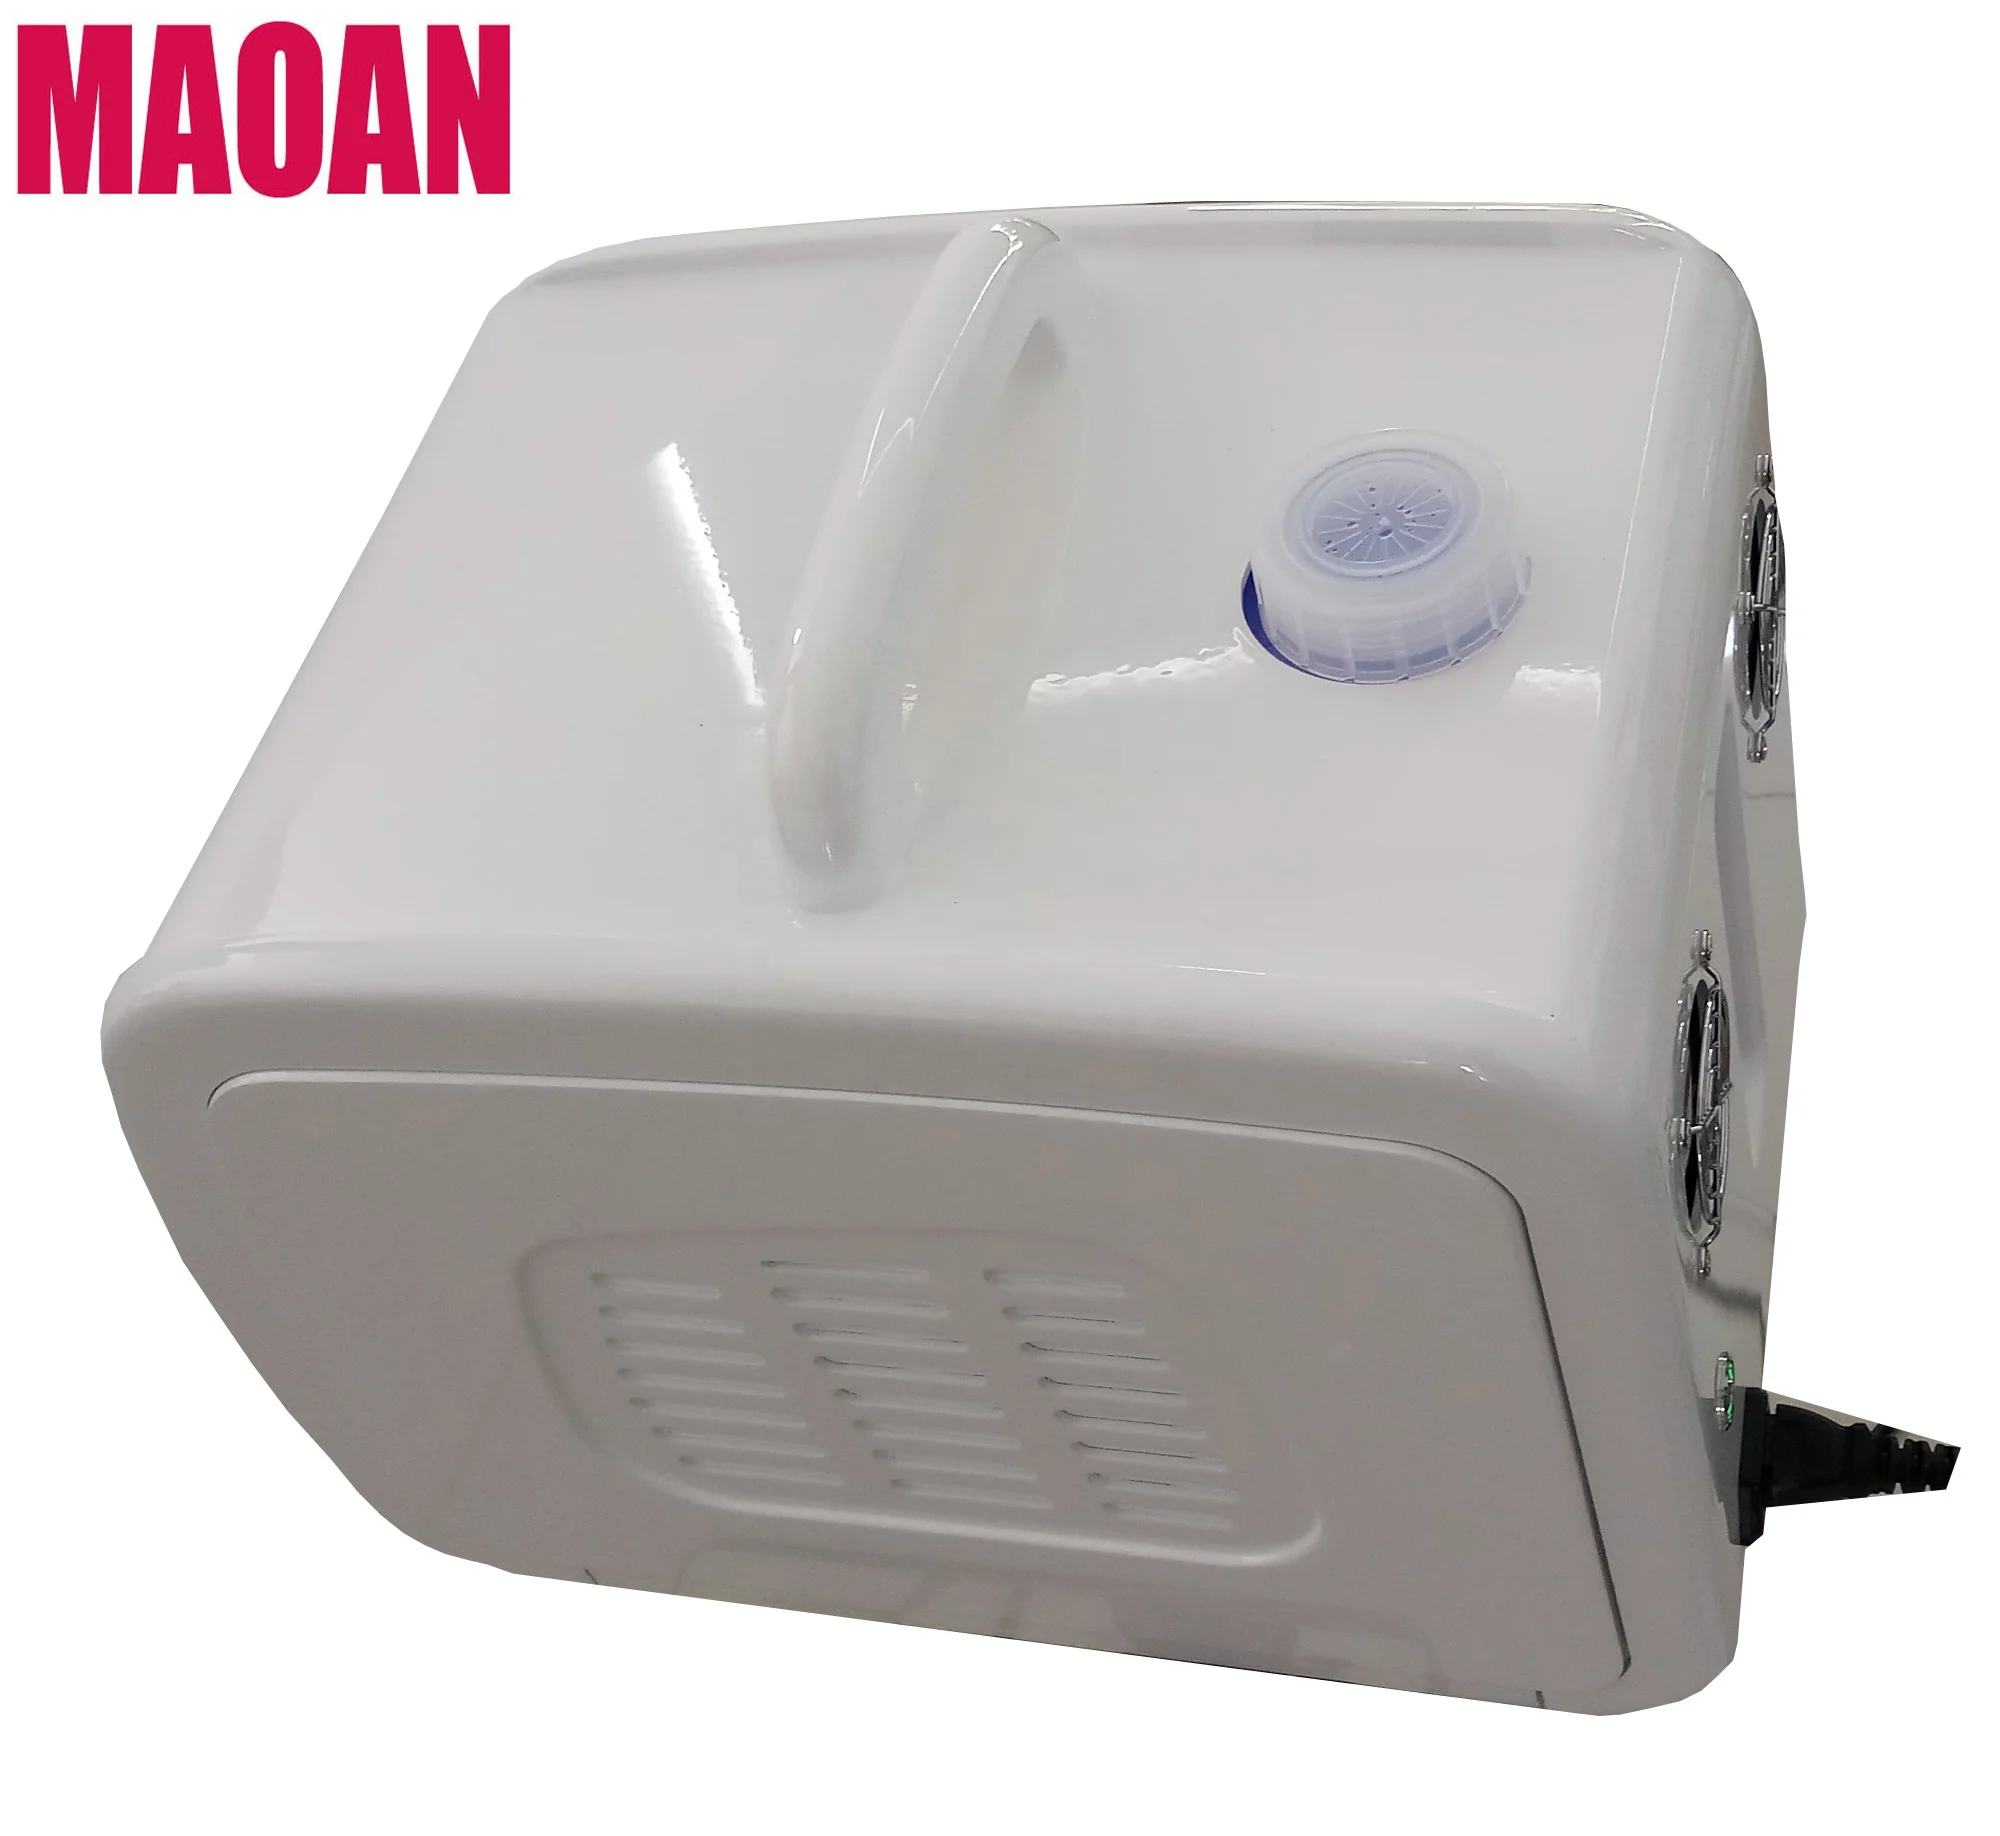 
Hydrogen Gas Generator Price for Breathing H2 water and Skin Treatment used at home for health 